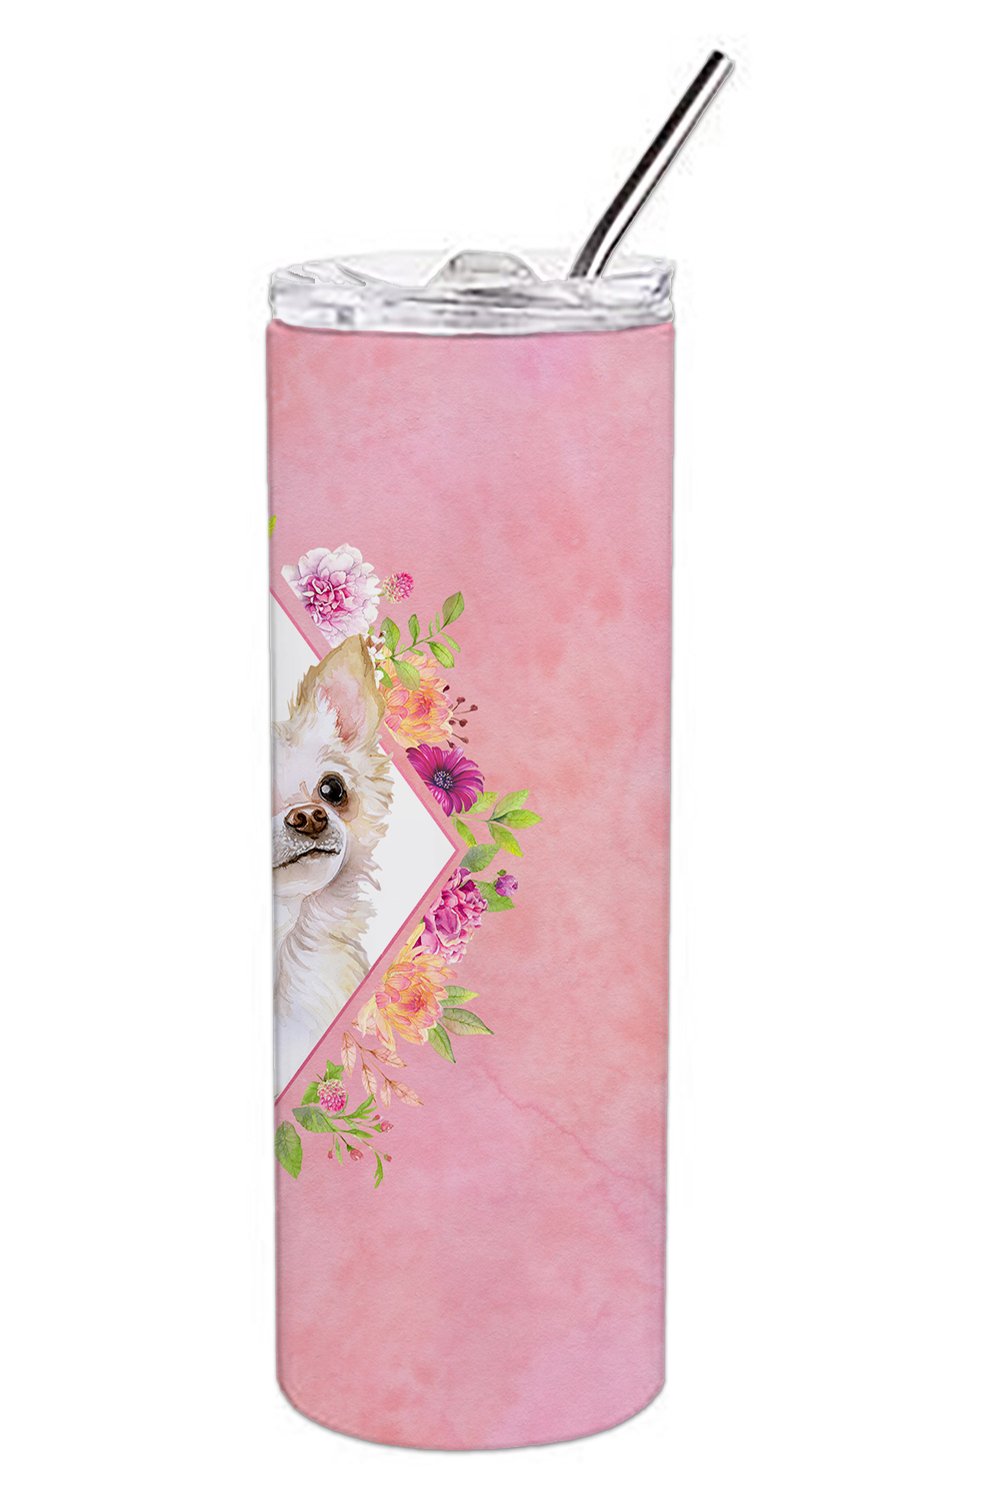 Long Hair Chihuahua Pink Flowers Double Walled Stainless Steel 20 oz Skinny Tumbler CK4127TBL20 by Caroline's Treasures